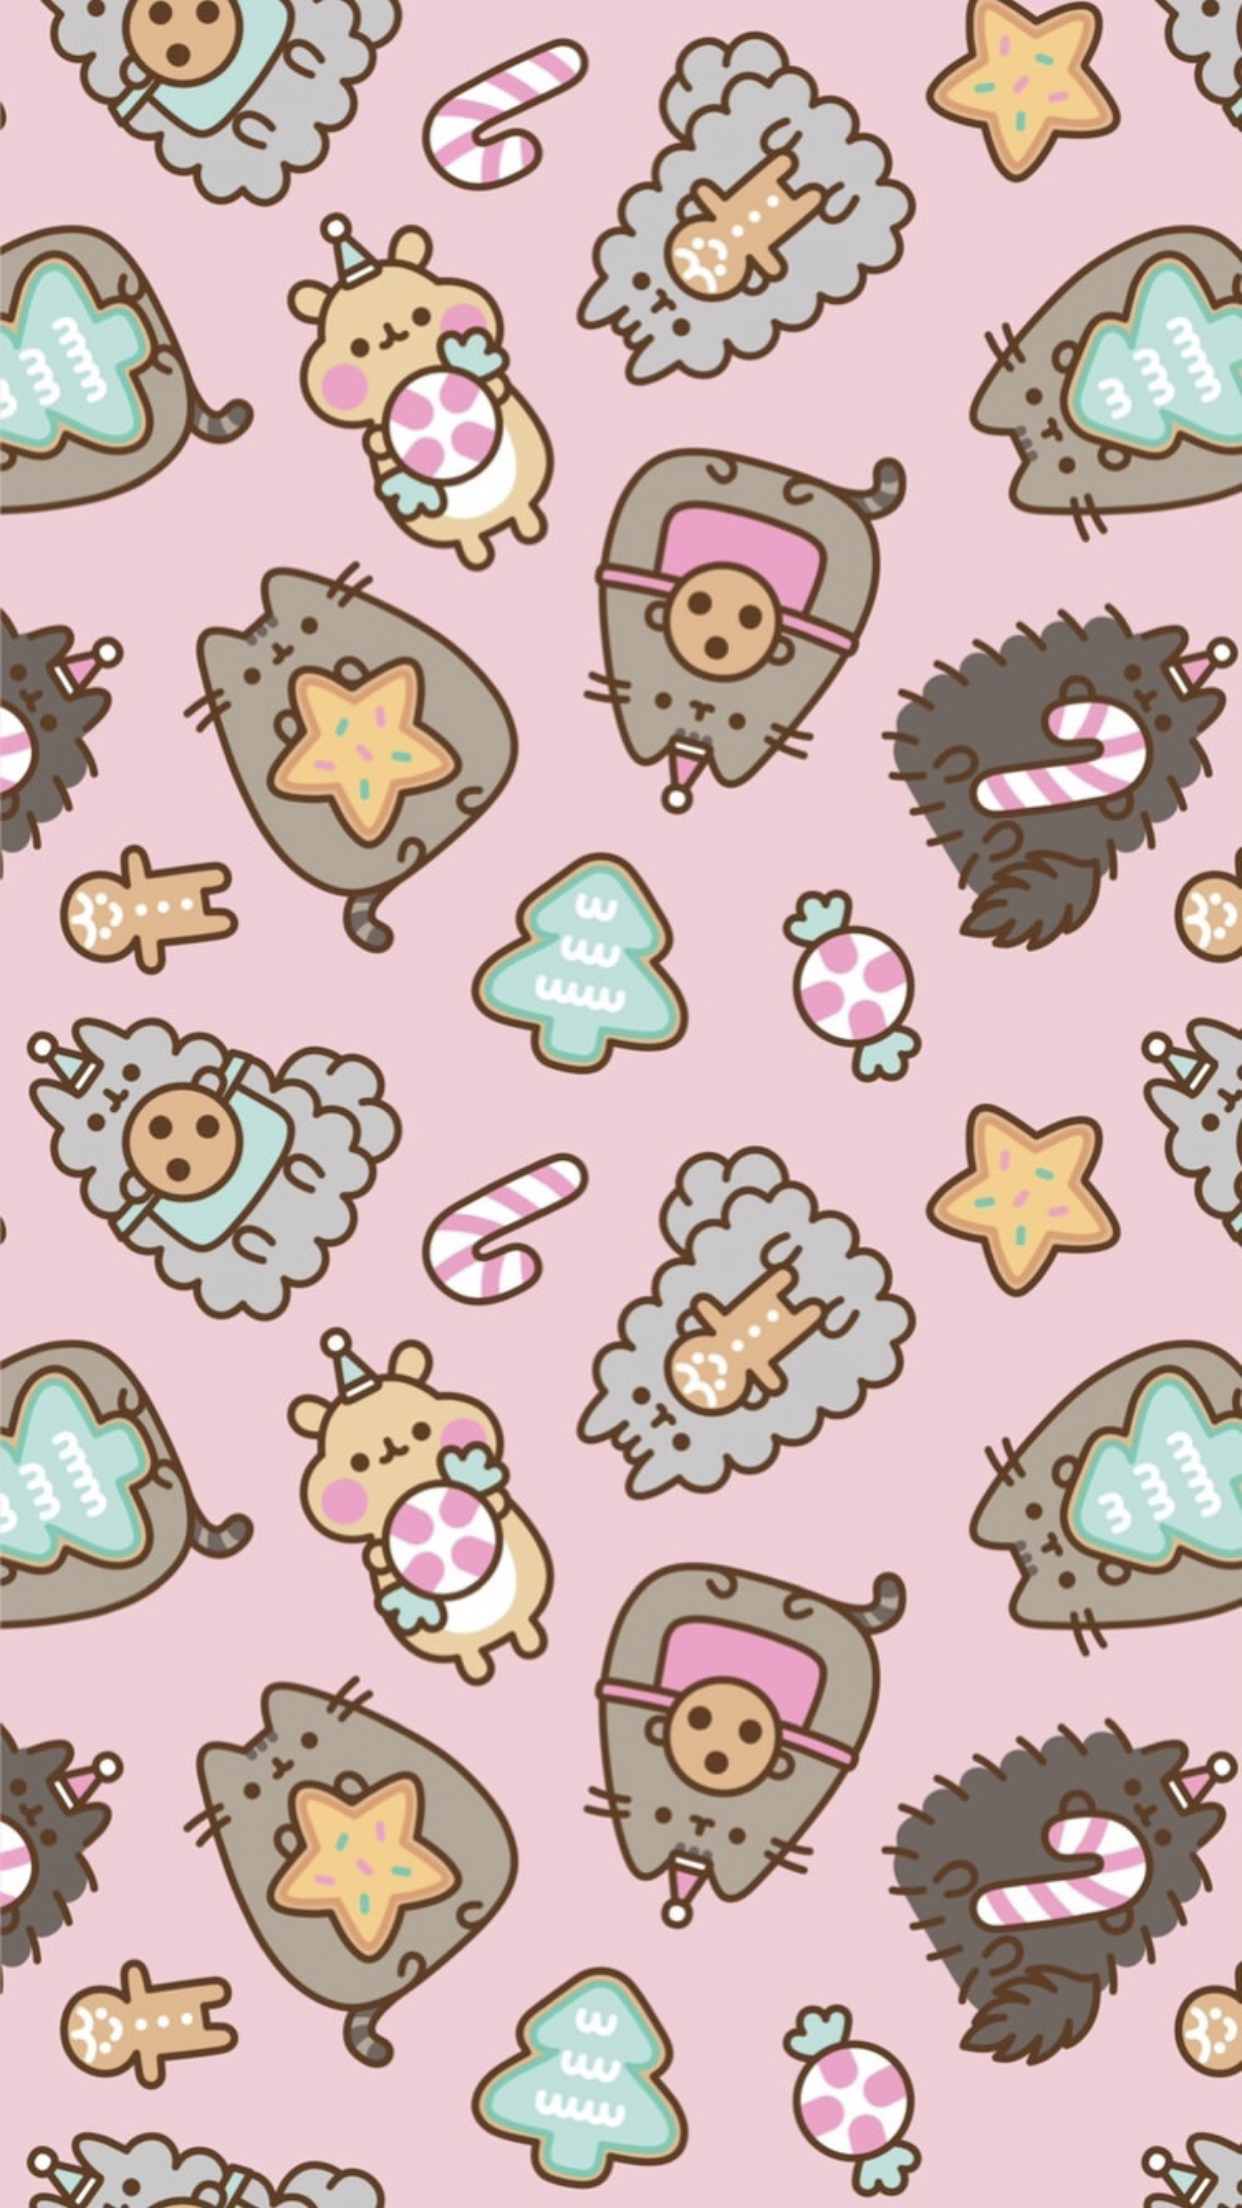 pusheen the cat christmas holiday wallpaper iphone background unicorn snow cookies. Cat phone wallpaper, Cat wallpaper, Kawaii wallpaper